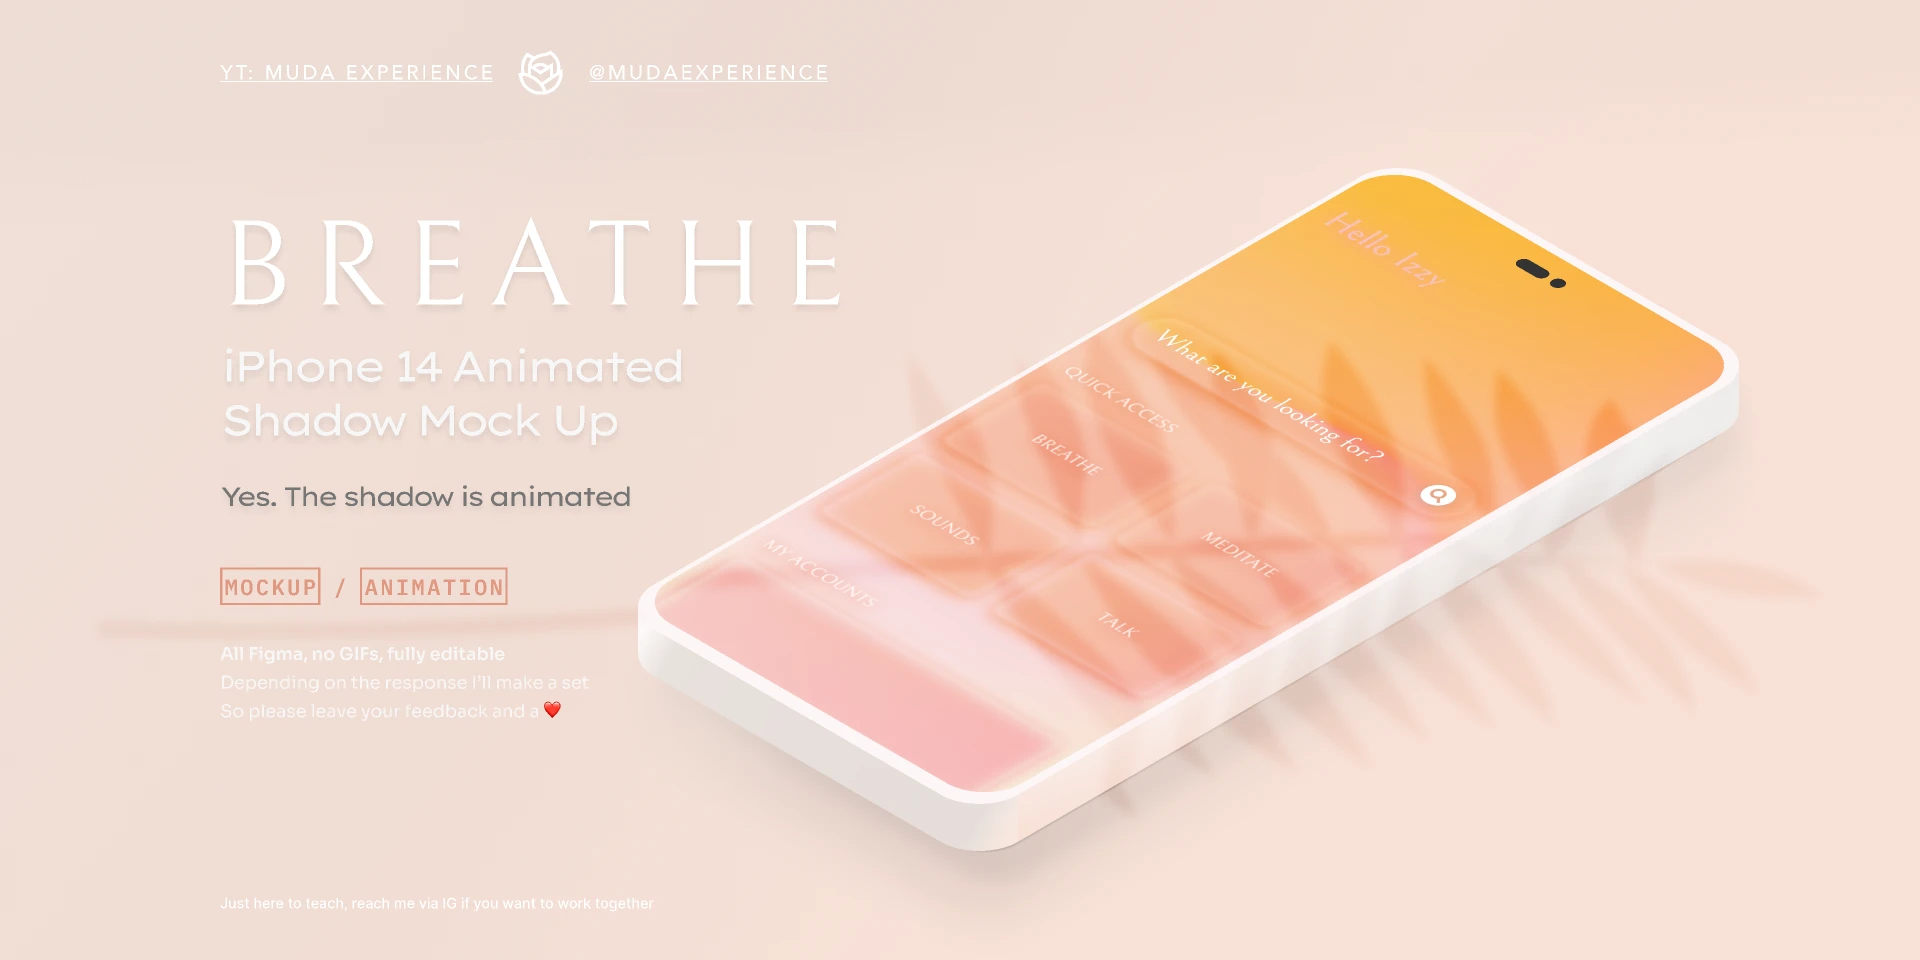 BREATHE  iPhone 14 Animated Shadow Mockup for Figma and Adobe XD